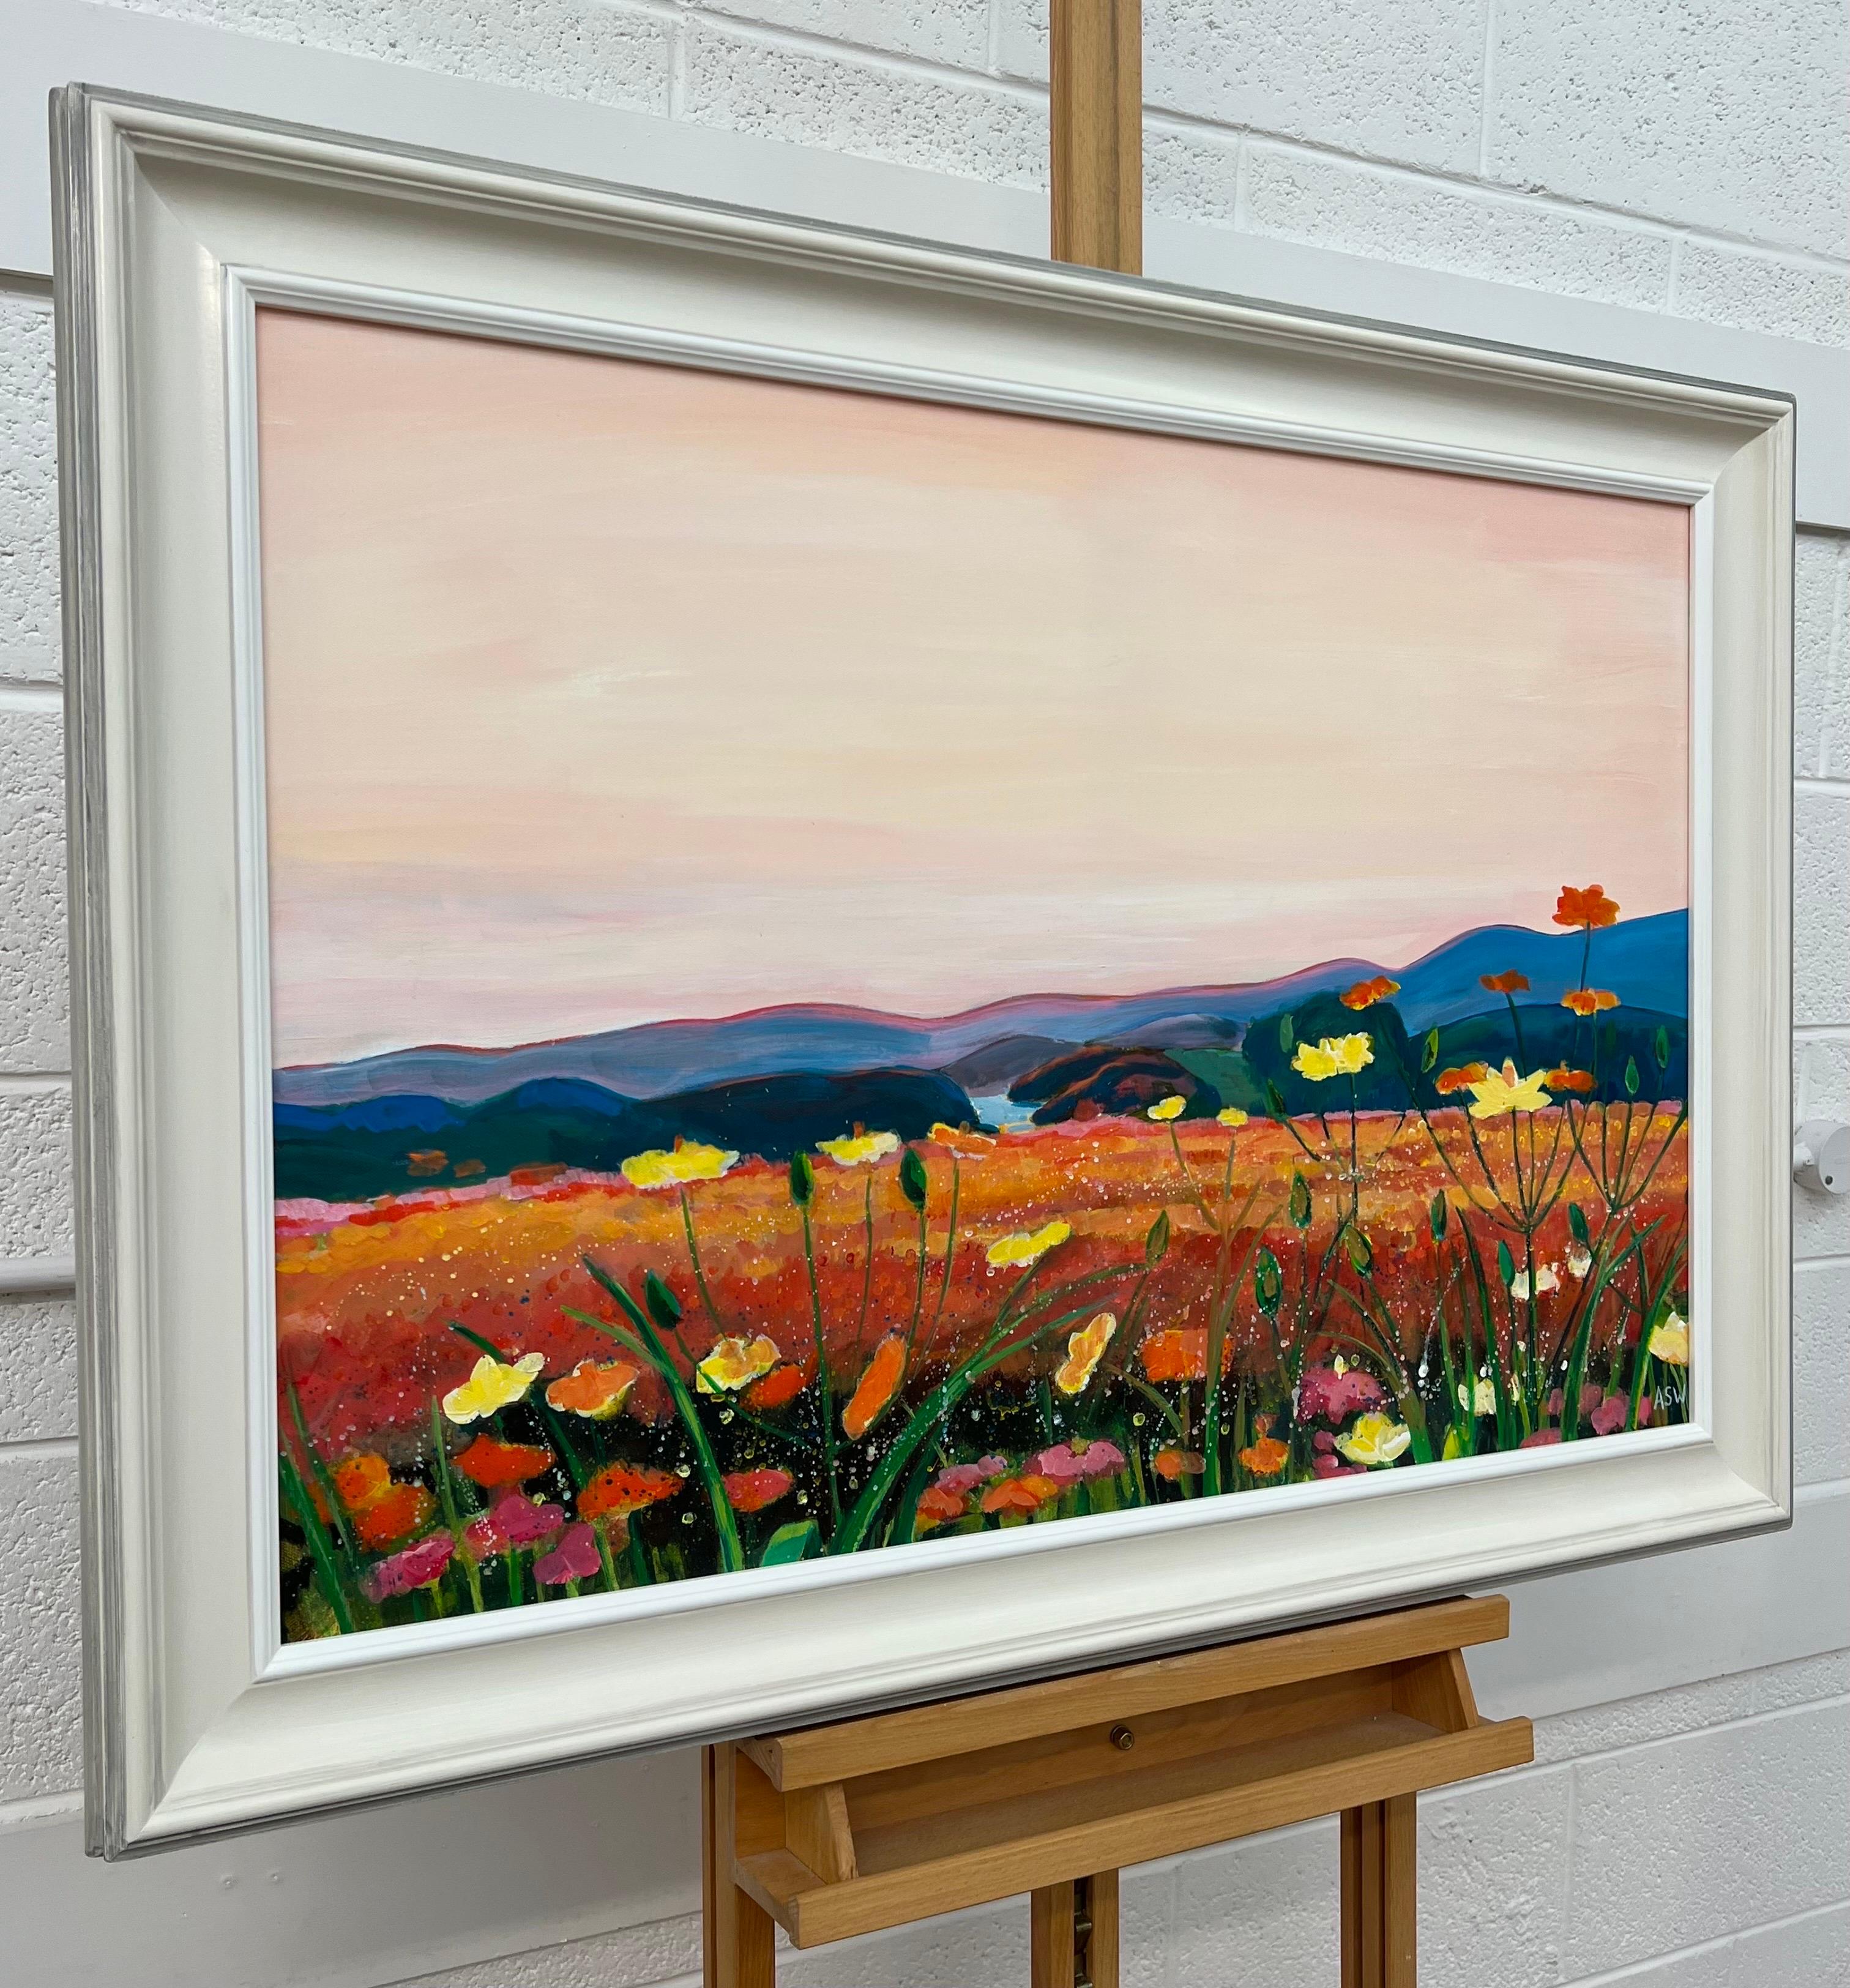 Warm Spanish Sunset Landscape with Wild Flowers by Contemporary British Artist - Painting by Angela Wakefield